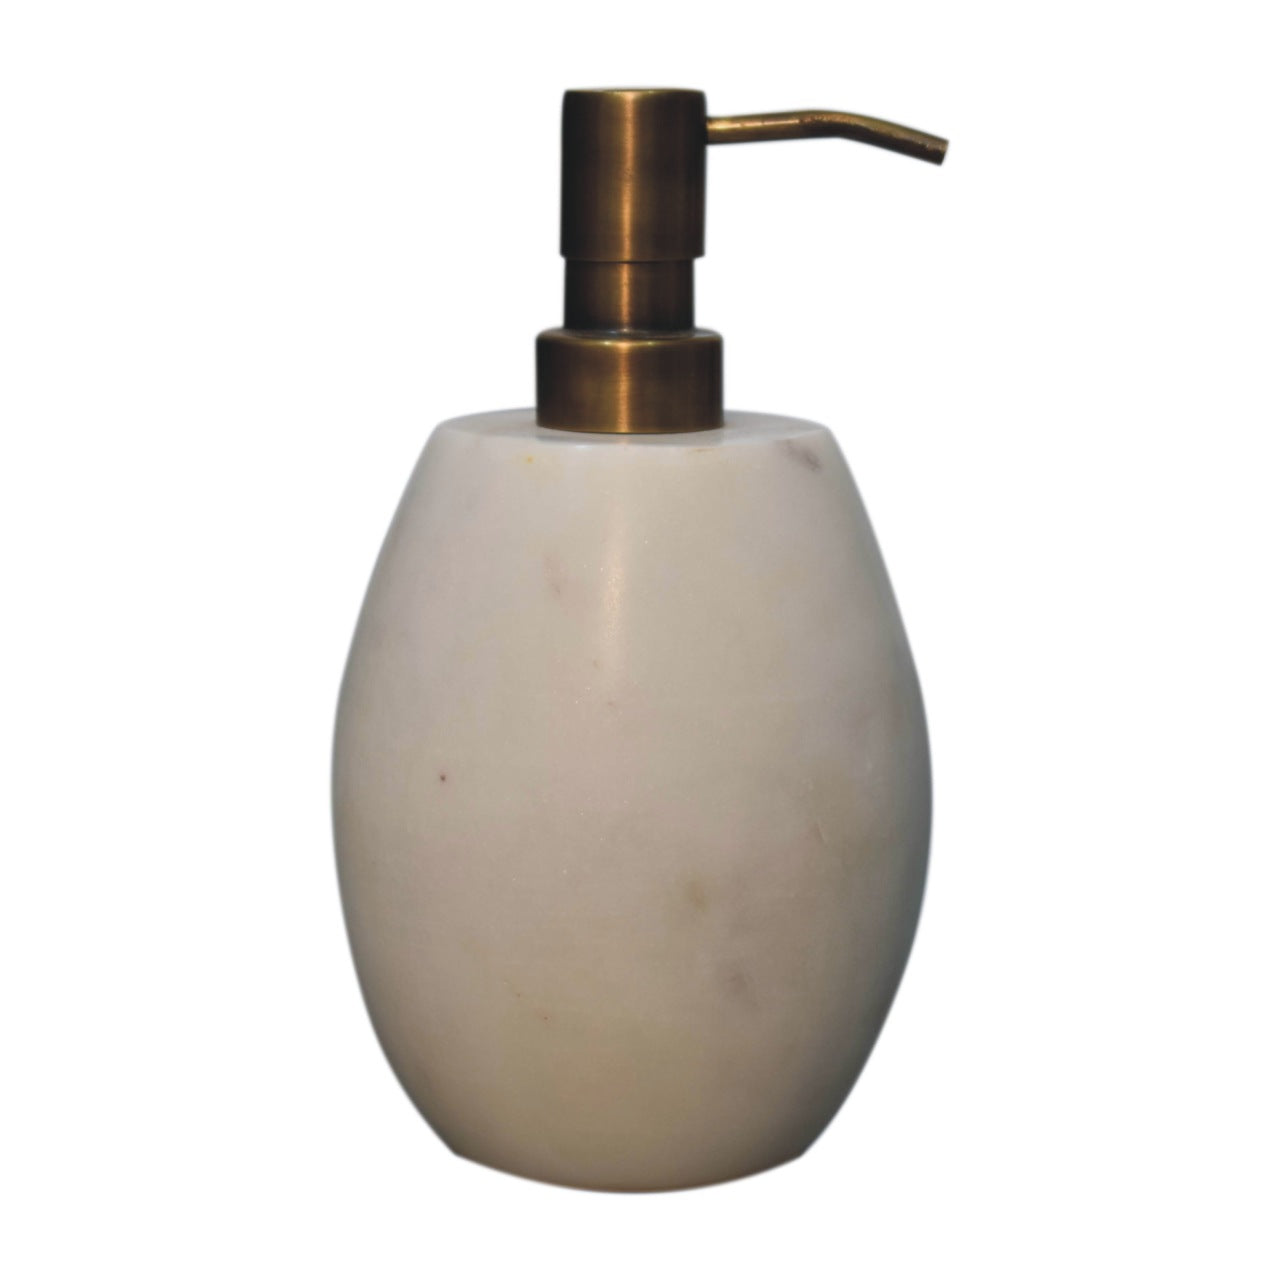 View White Marble Soap Dispenser of 2 information